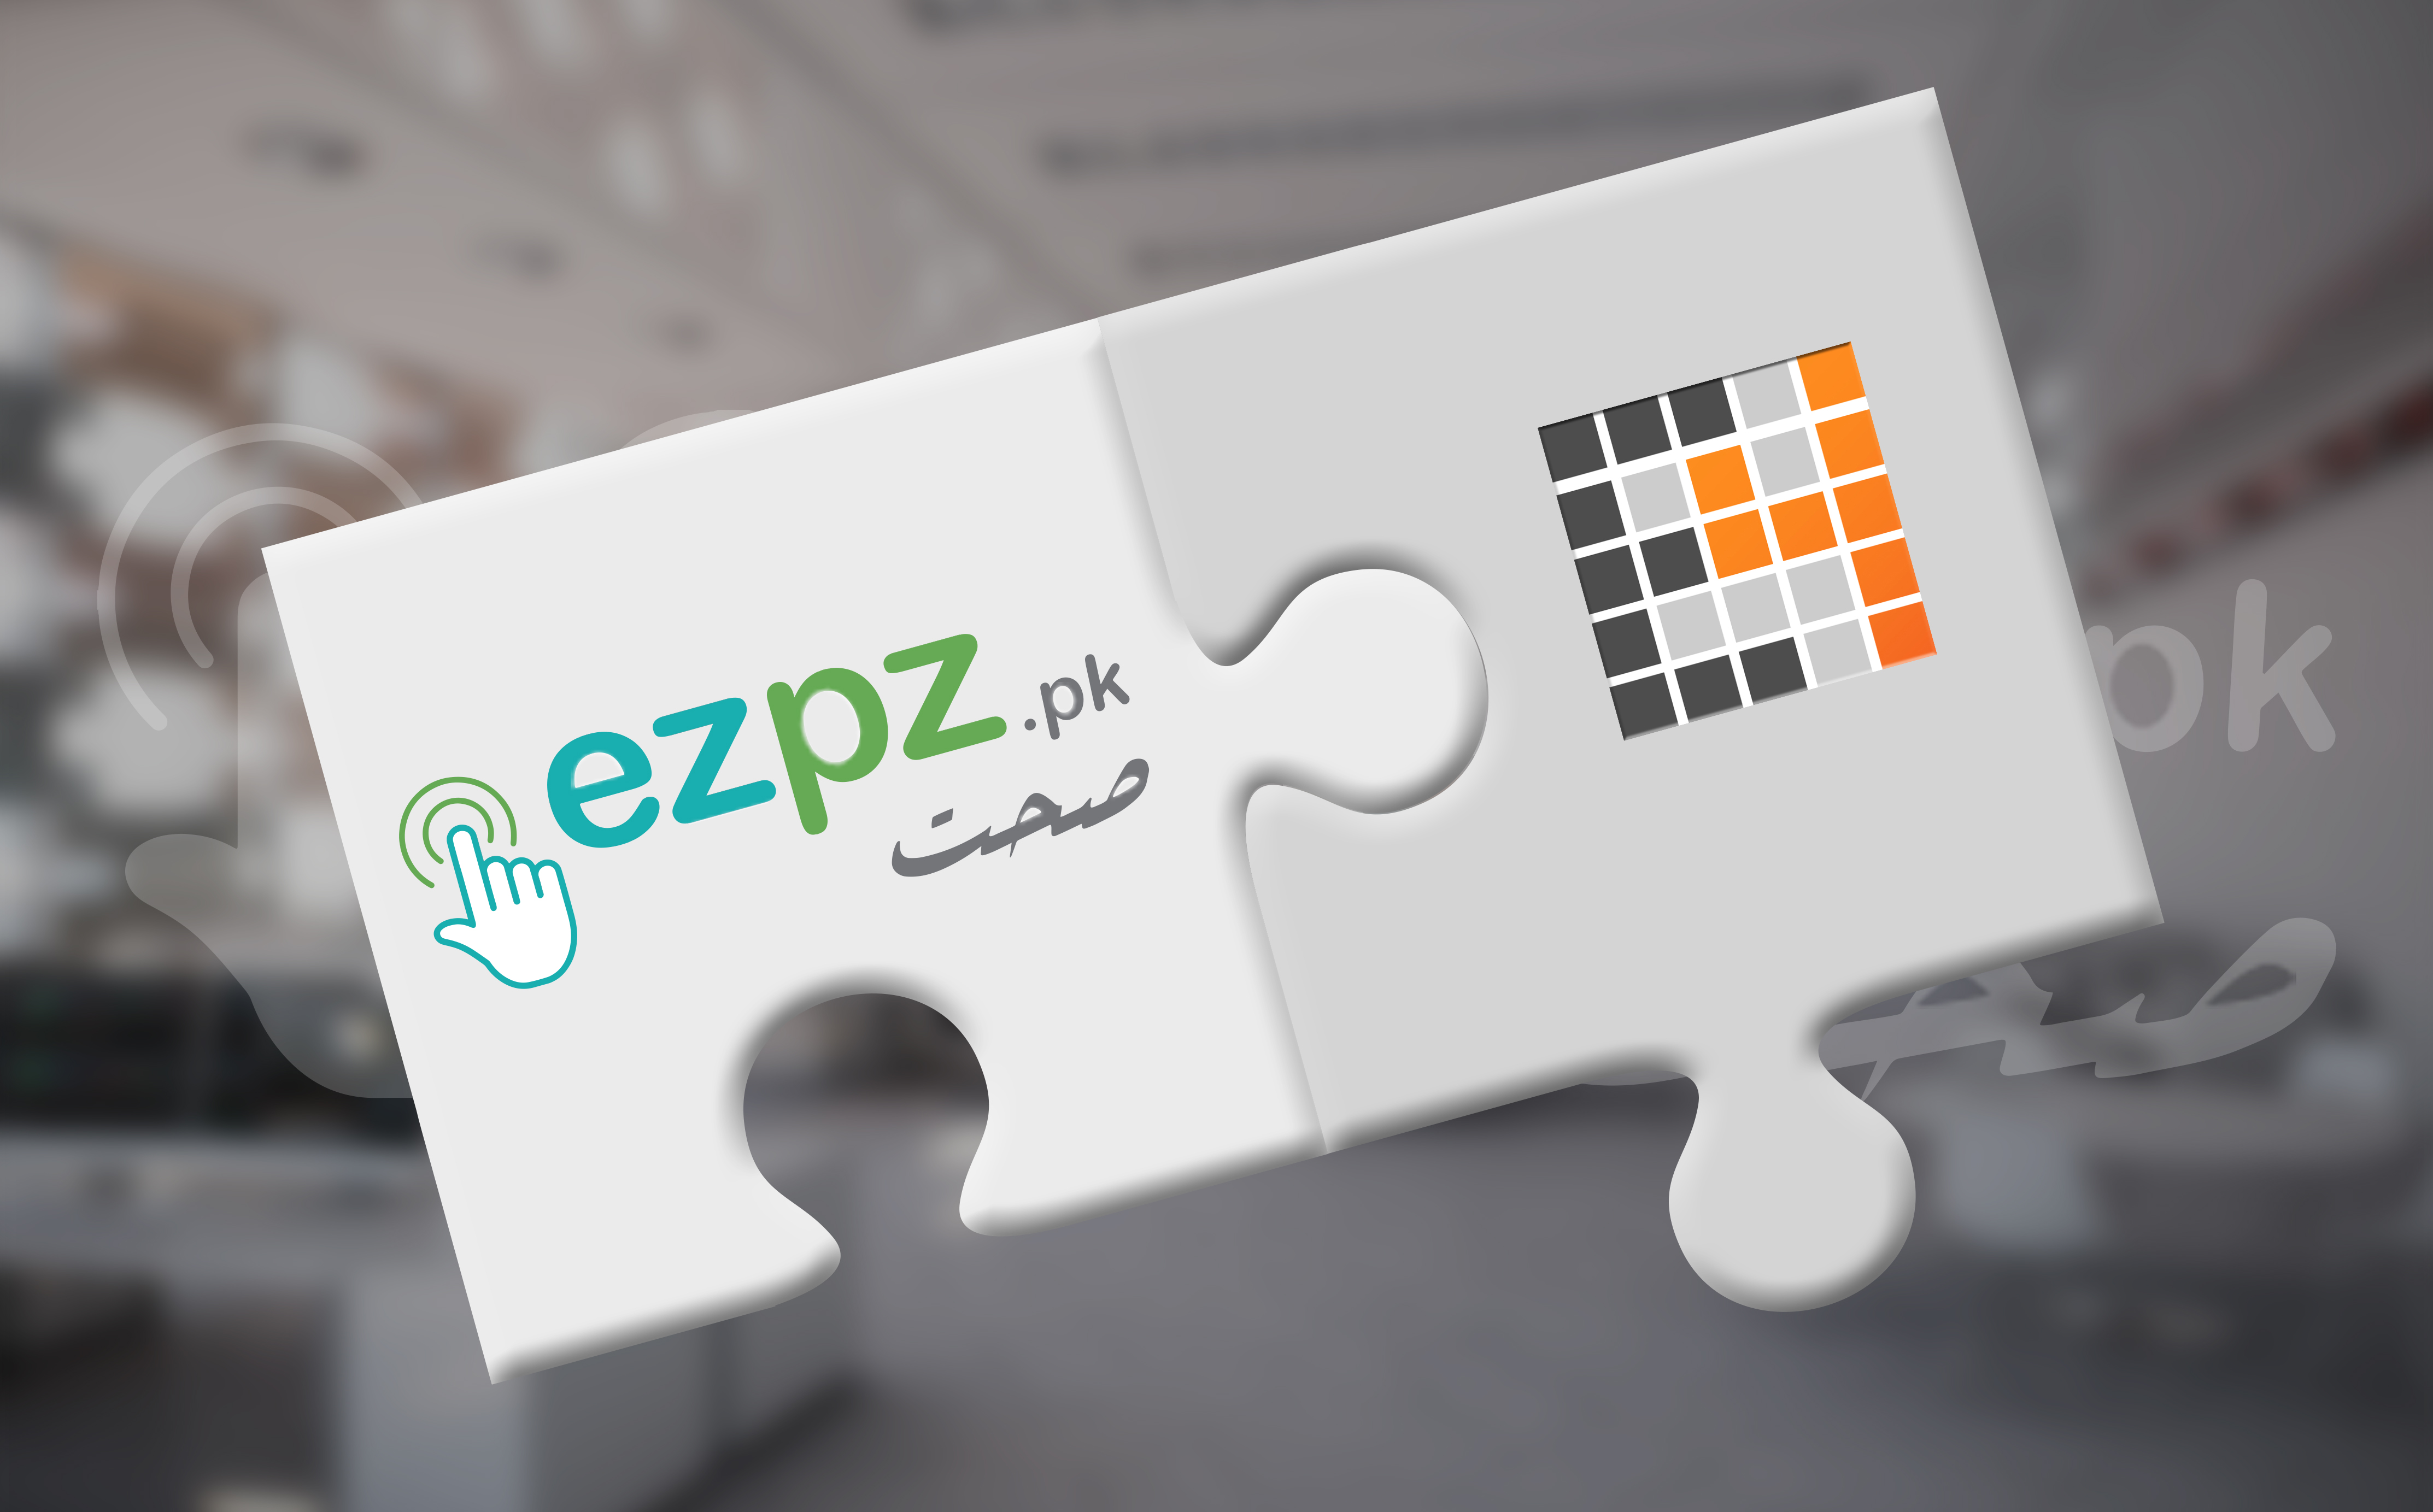 ExPz and E4 Technologies